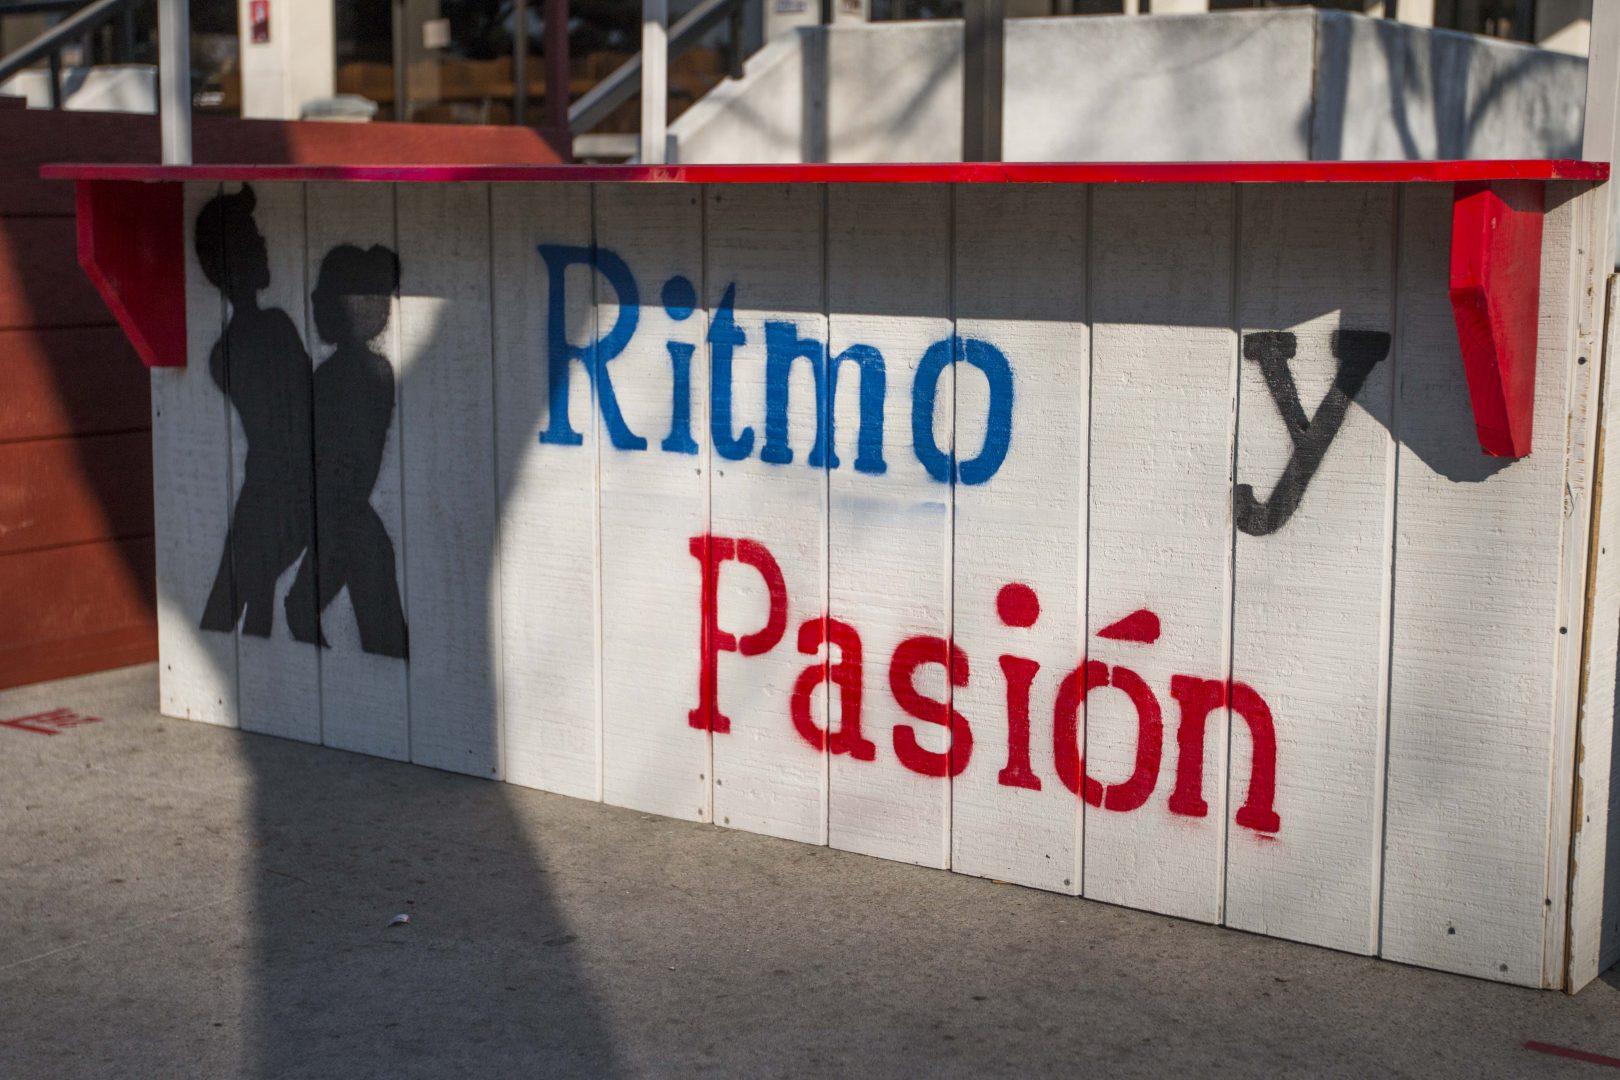 The Ritmo y PasiÃ³n booth in front of the University Student Union. (Benjamin Cruz/The Collegian)